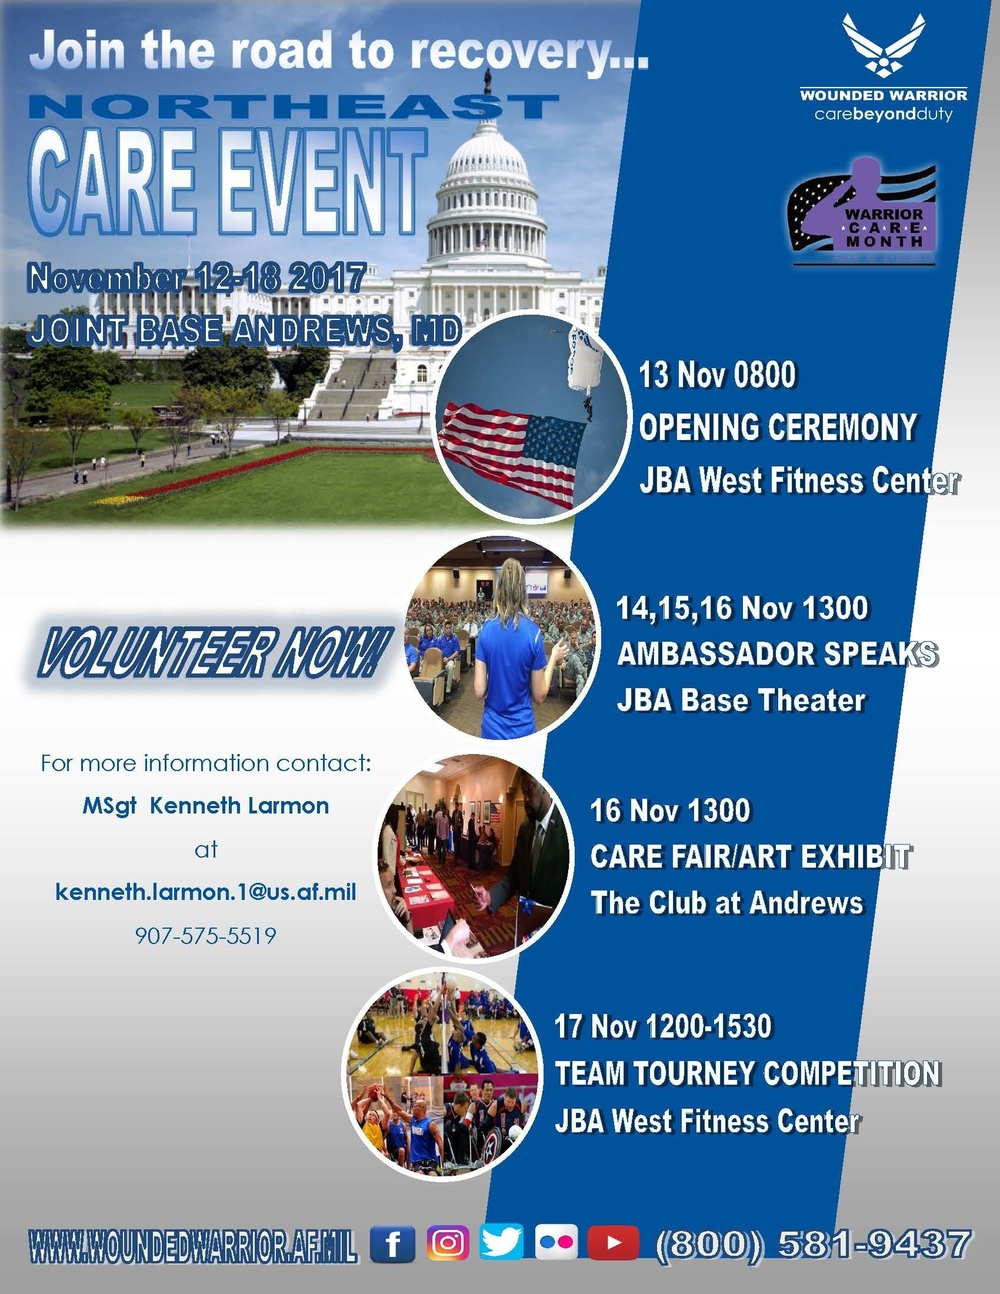 Wounded Warrior CARE Event coming to JBA